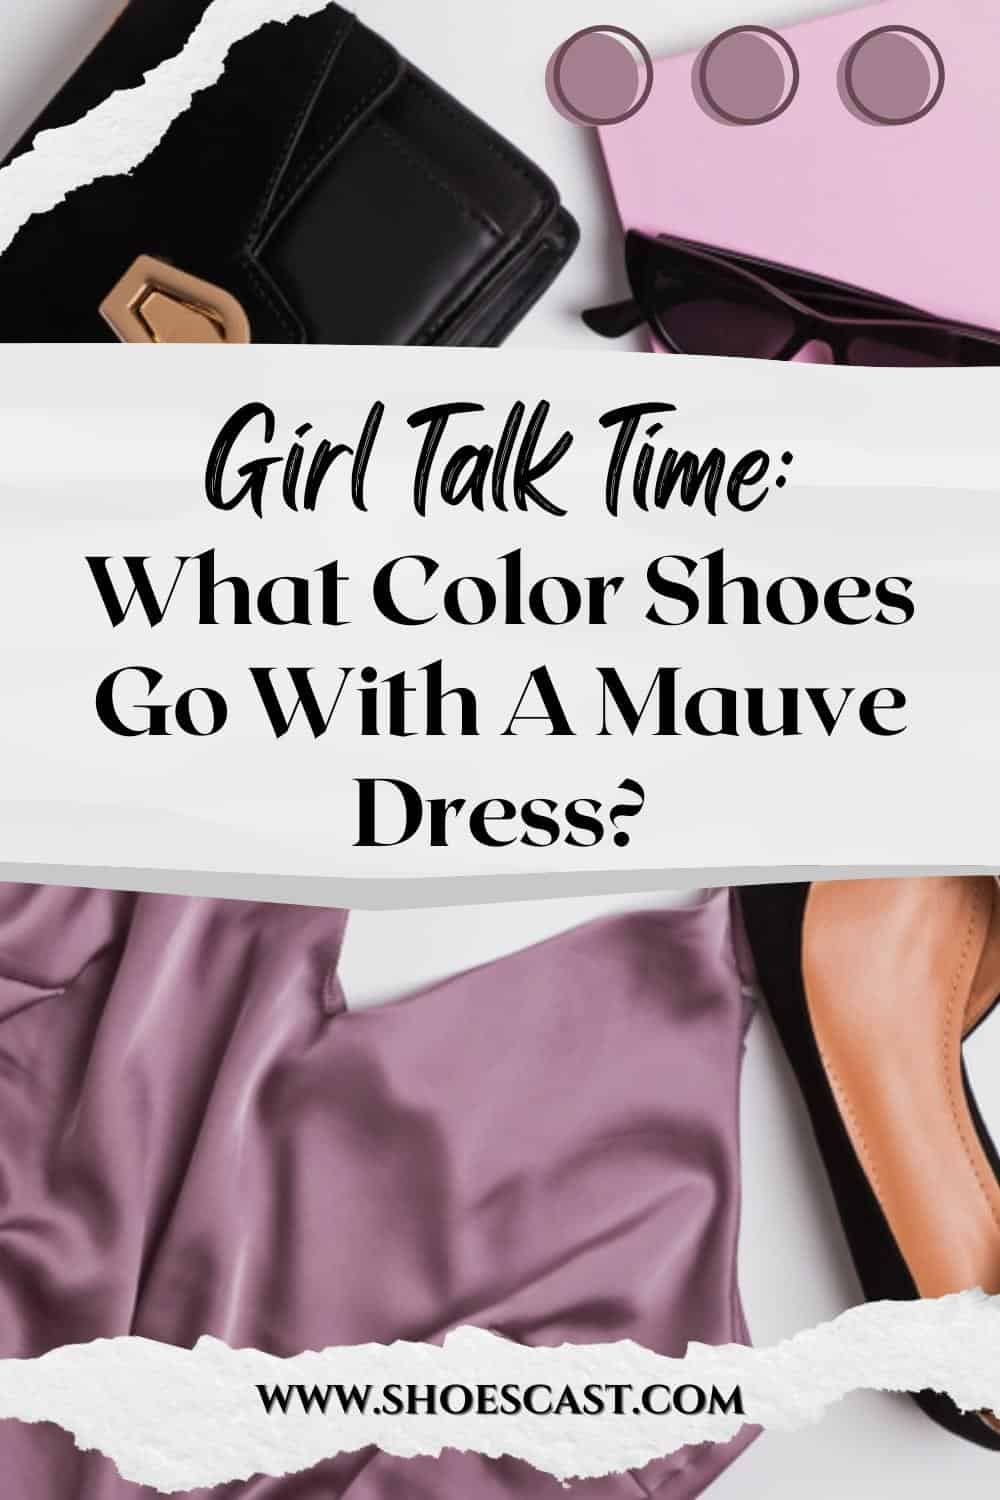 Girl Talk Time: What Color Shoes Go With A Mauve Dress?